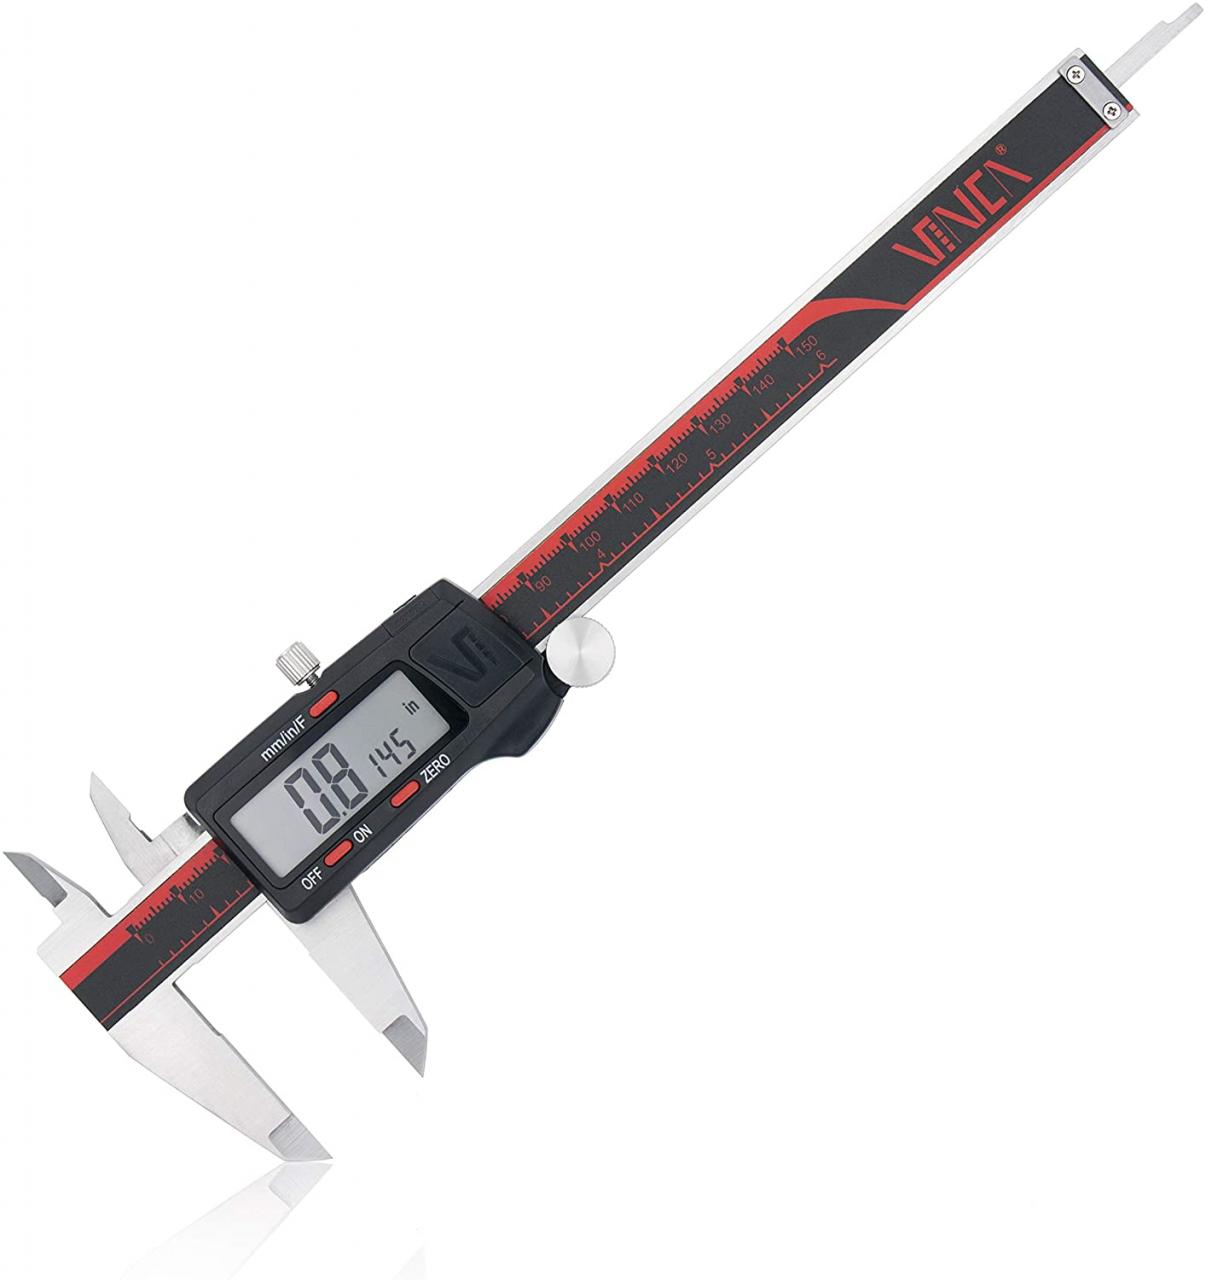 VINCA DCLA-0605 High Quality Electronic Digital Caliper 0-6 Inch/150 mm  Stainless Steel Body